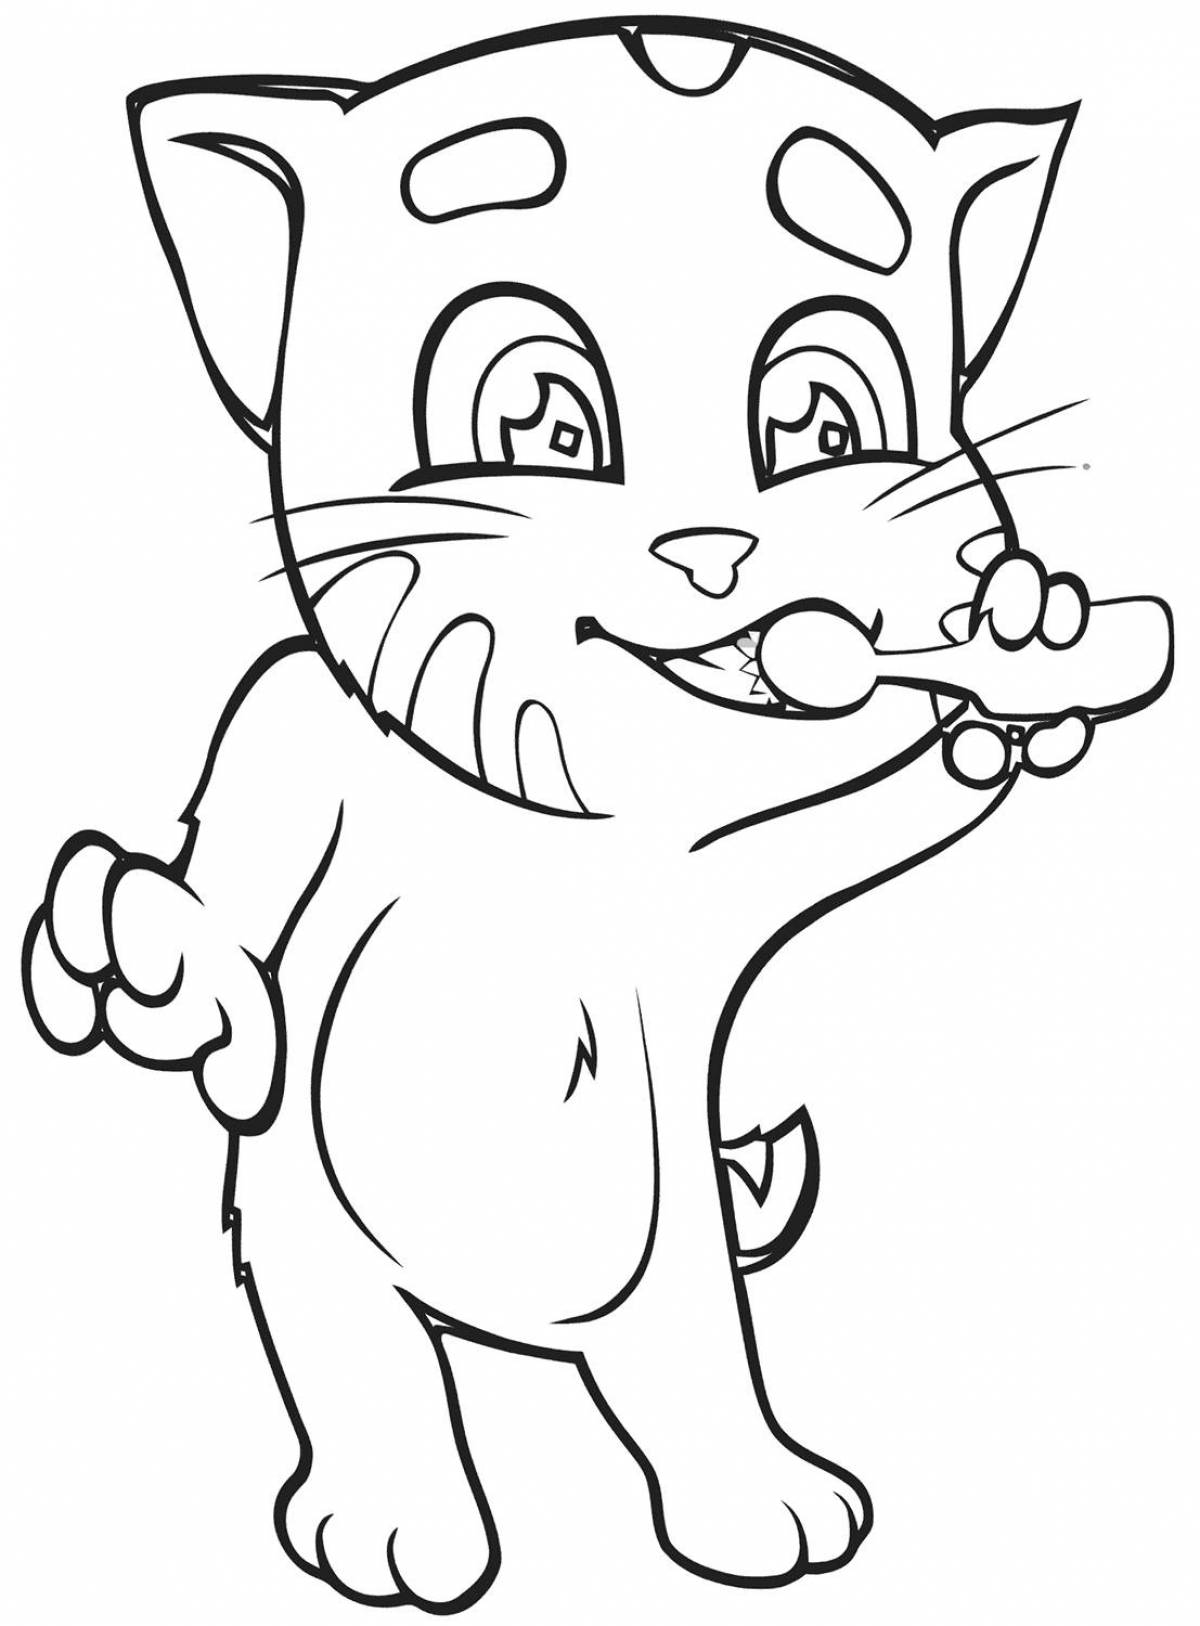 Gorgeous talking tom coloring book